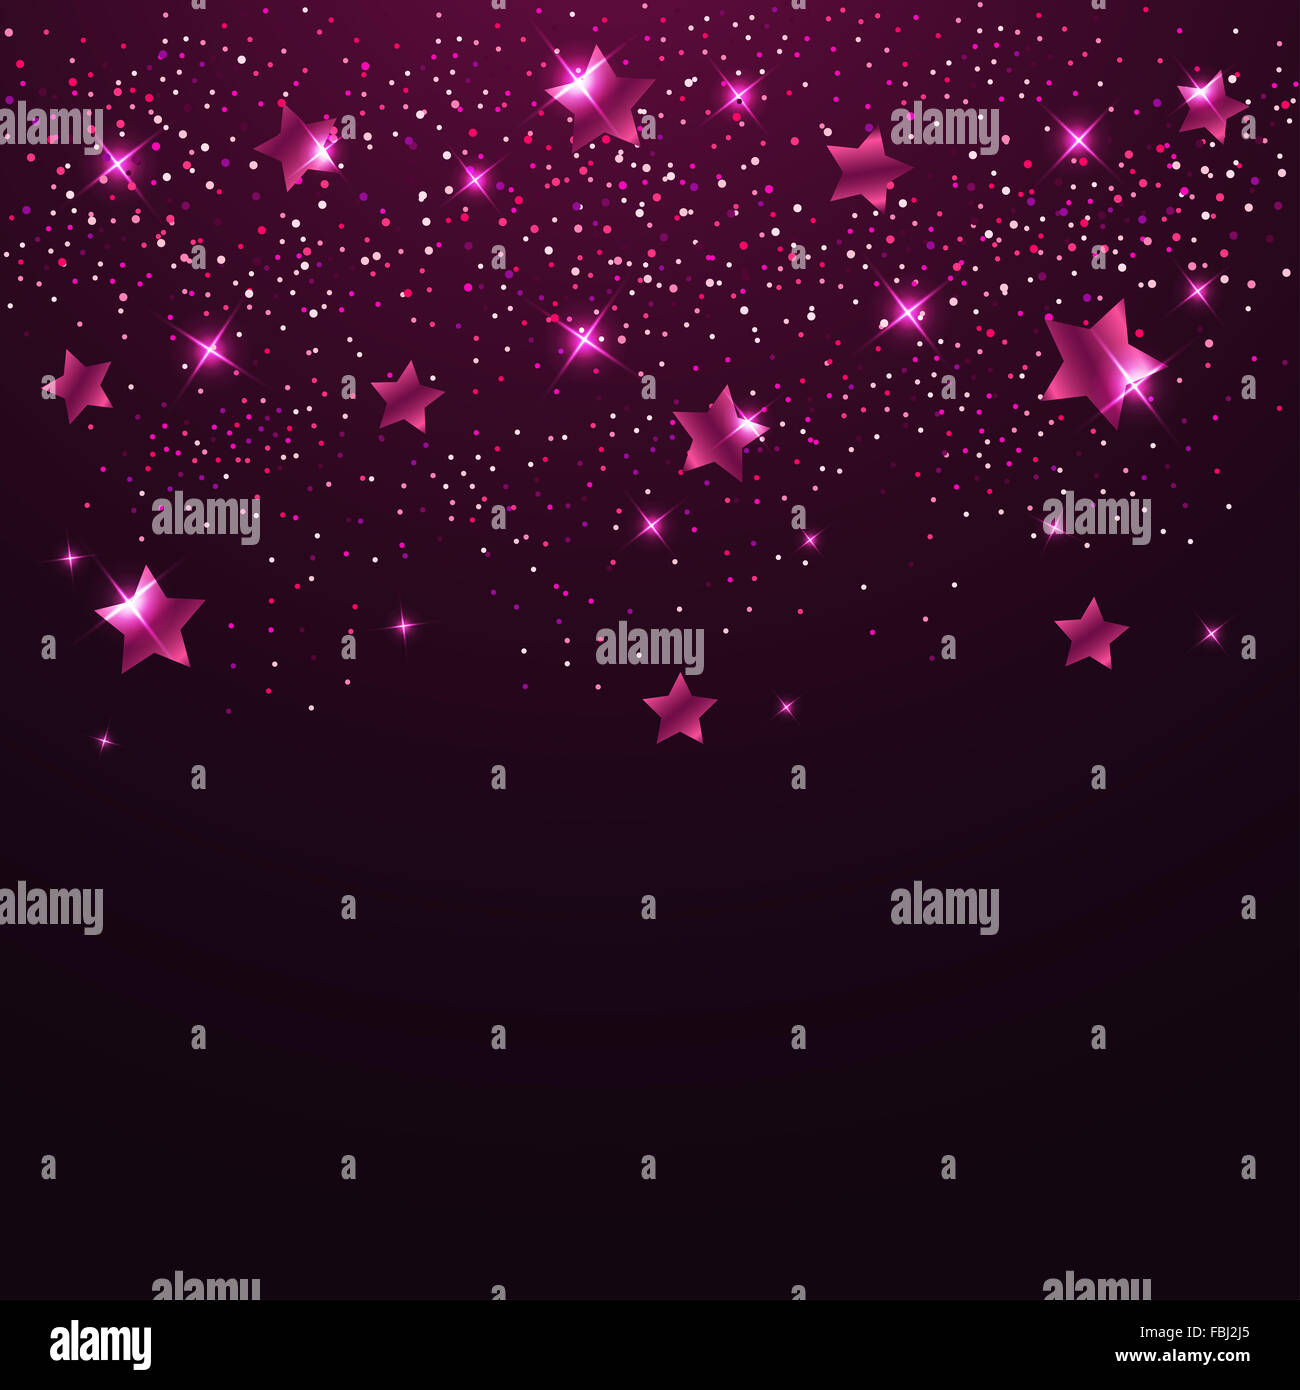 Abstract background with pink shining stars Stock Photo